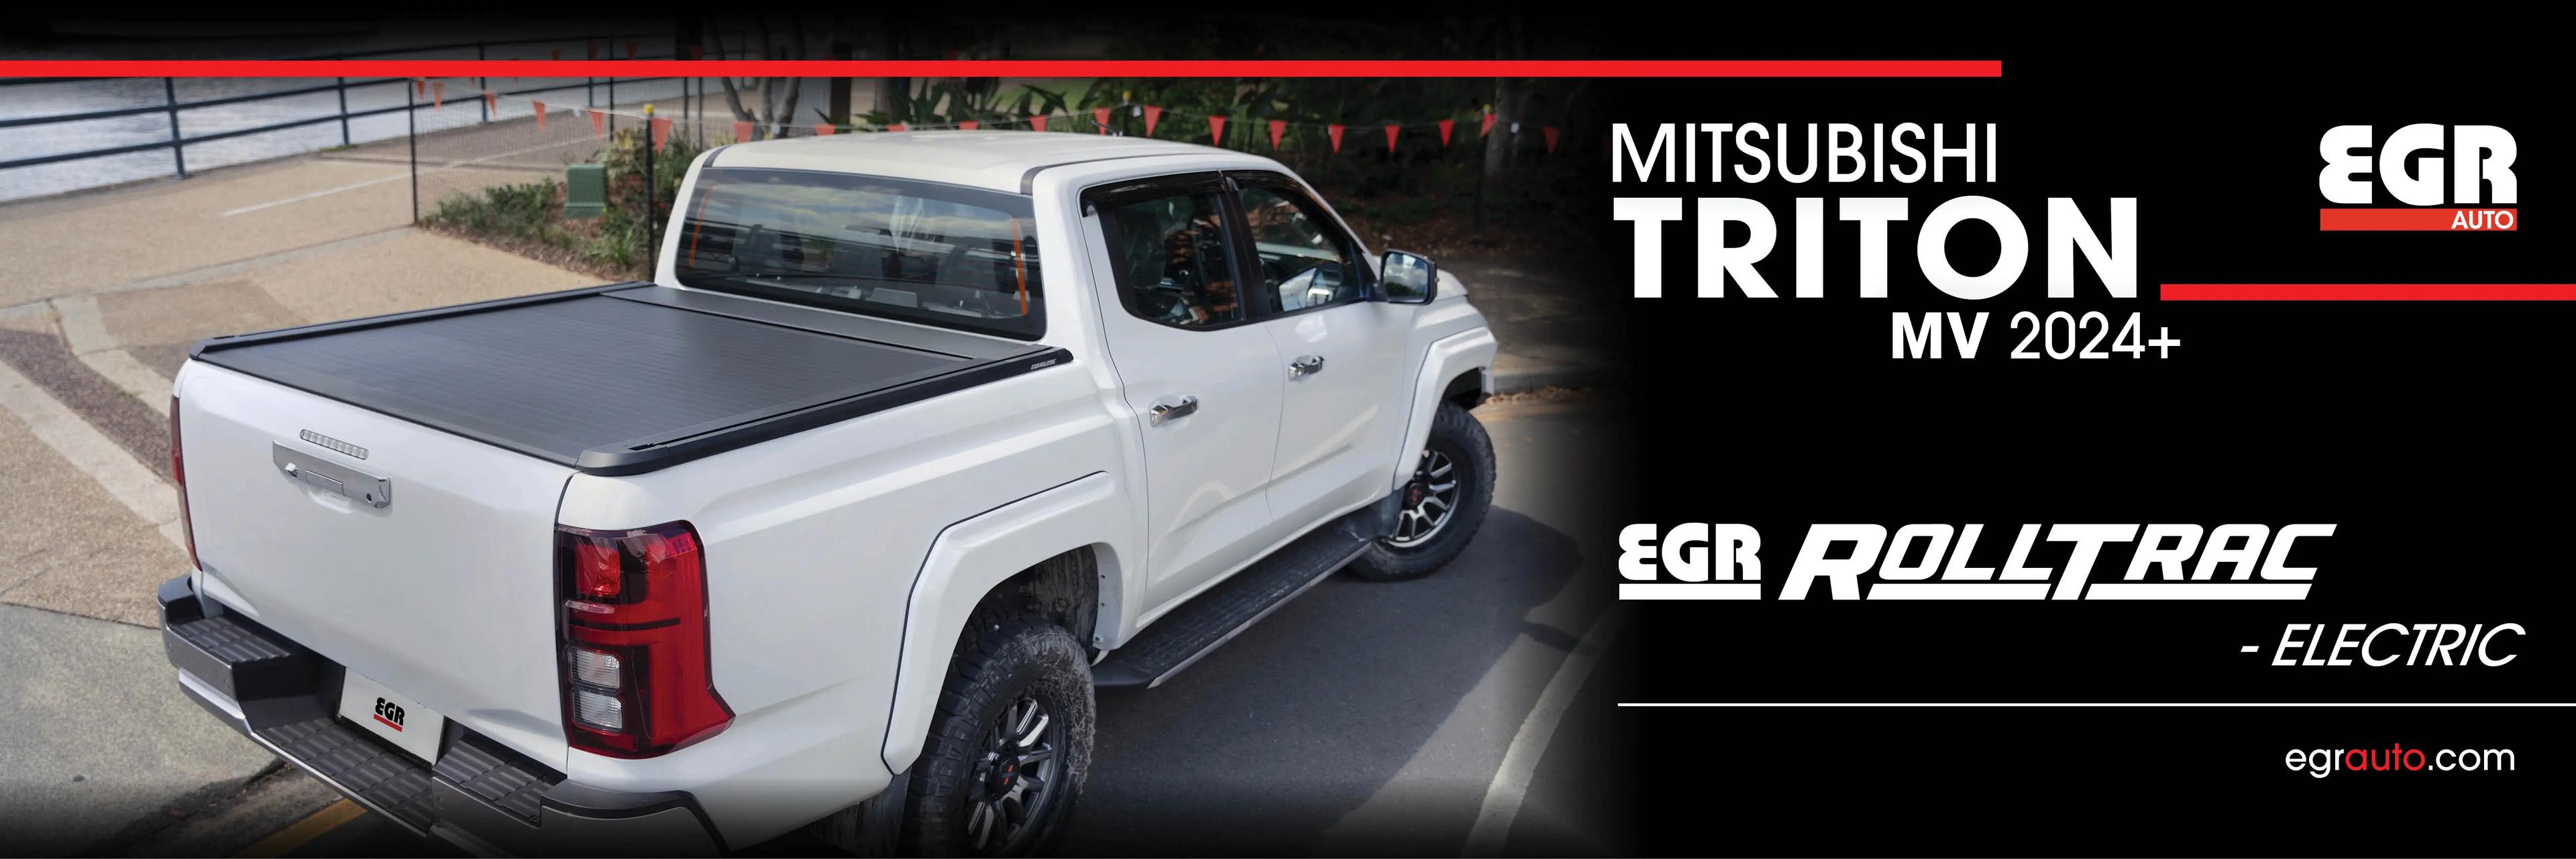 Promo banner - Click here for new EGR Rolltrac Electric available now for the Mitsubishi Triton MV 2024.